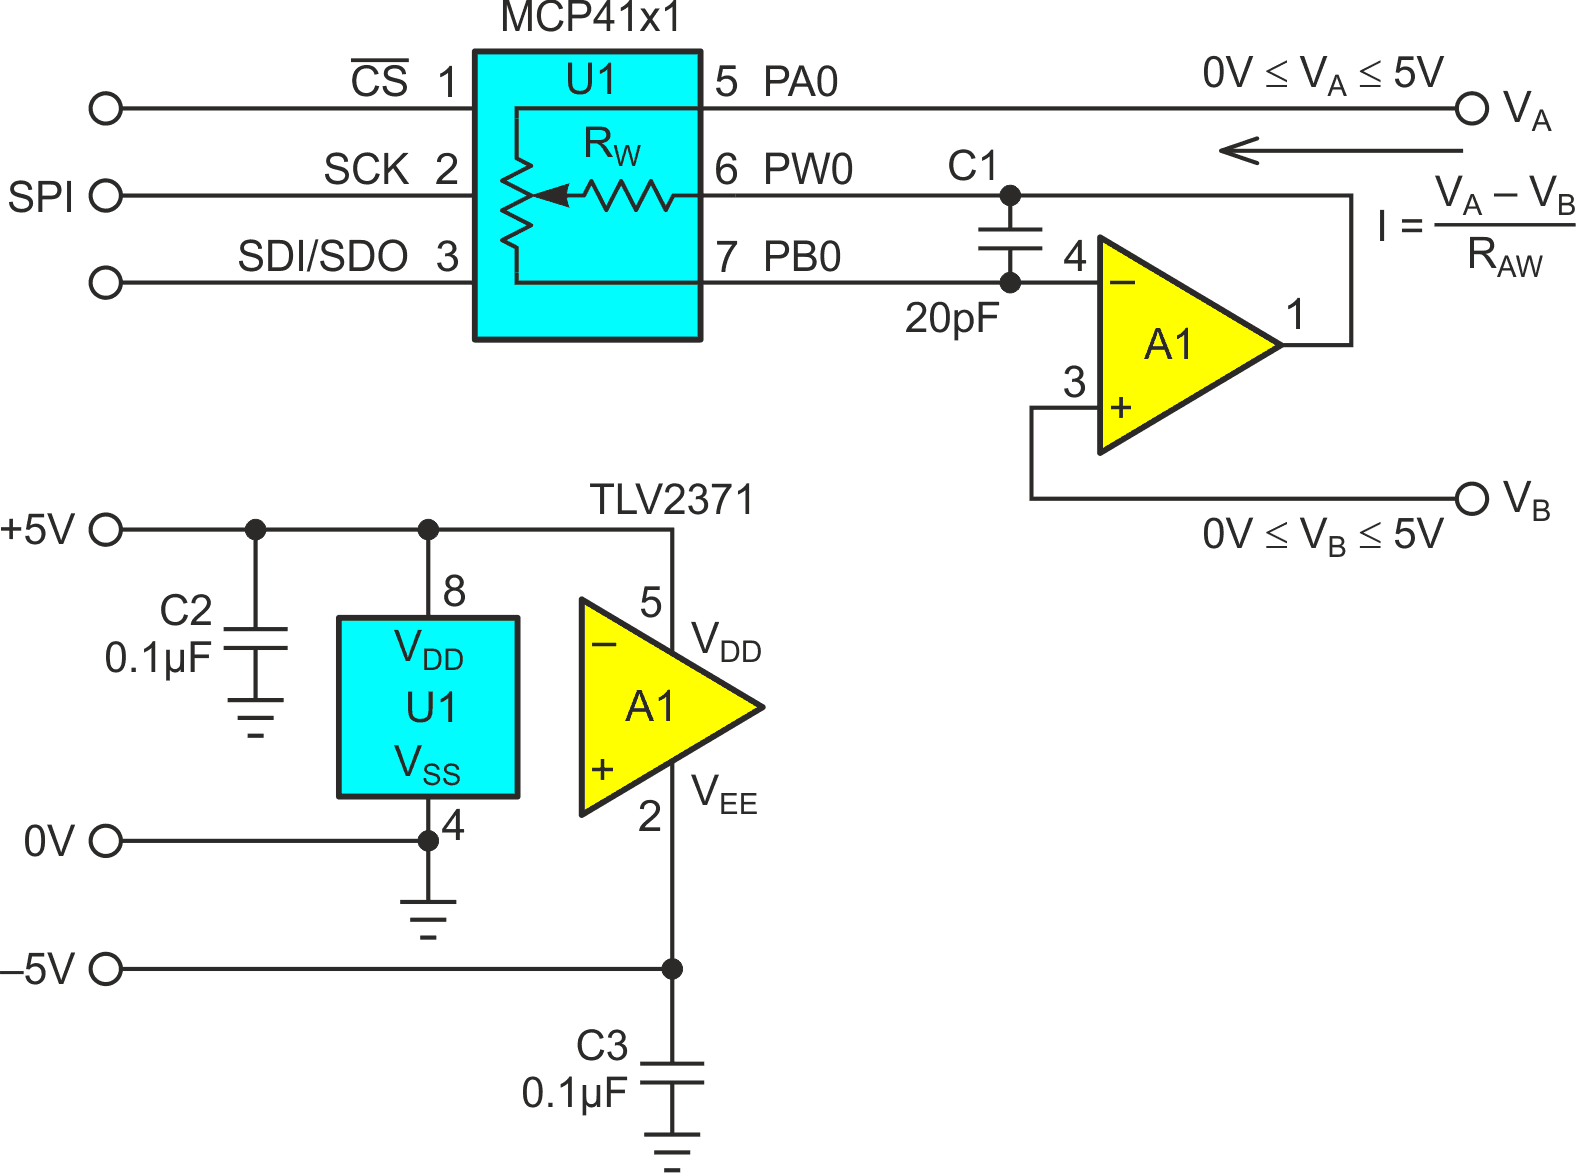 Op-amp A1 actively drives digital pot U1 wiper terminal PW0 to force VPBO = VB while drawing negligible current through resistance RWB, thus cancelling the effect of RW.